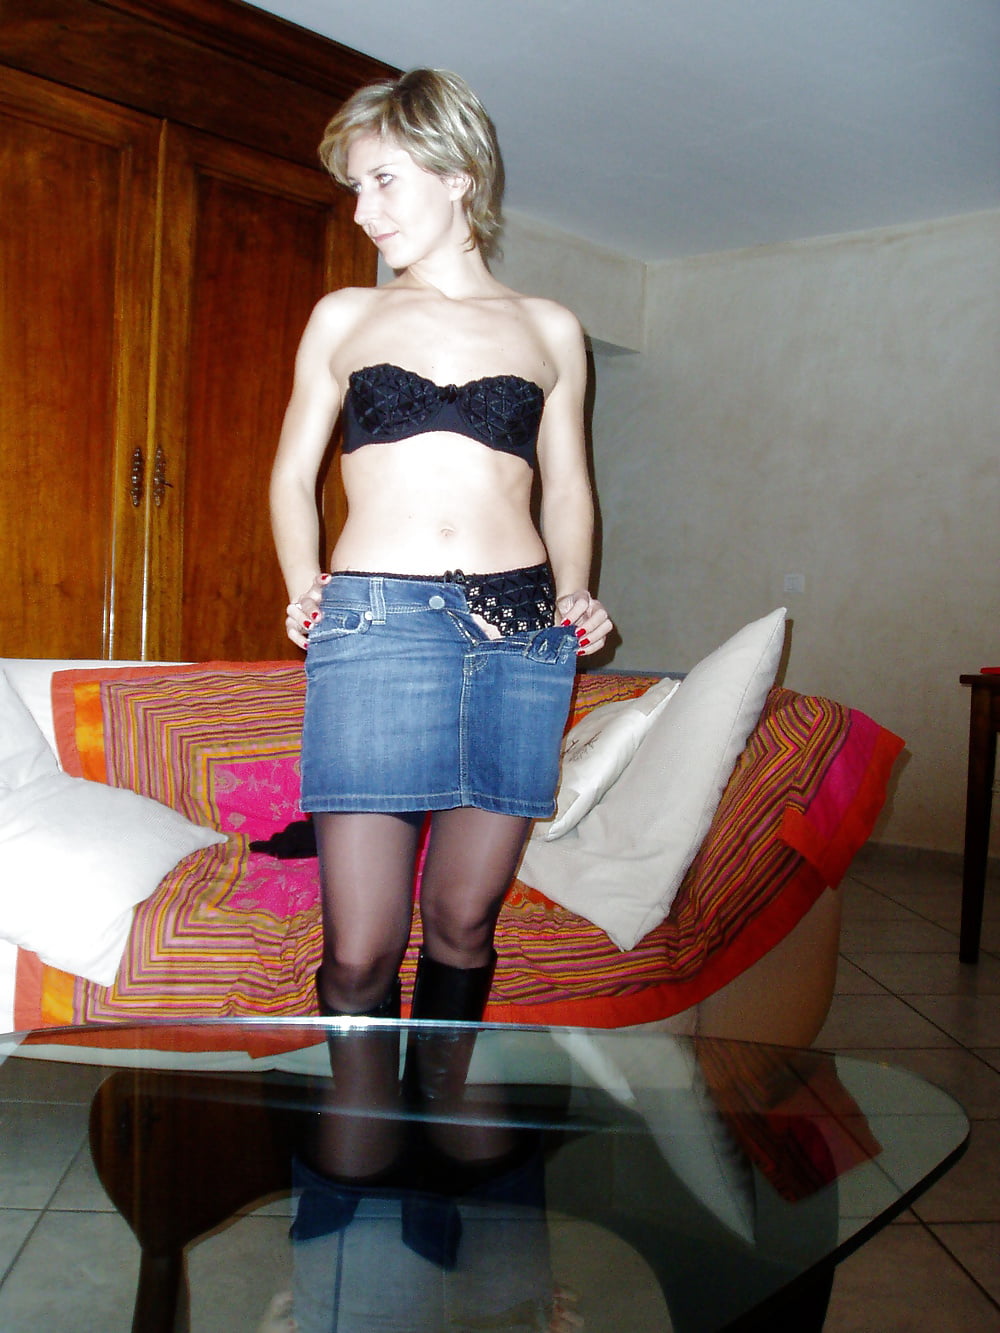 Hot wife in jeans skirt pict gal